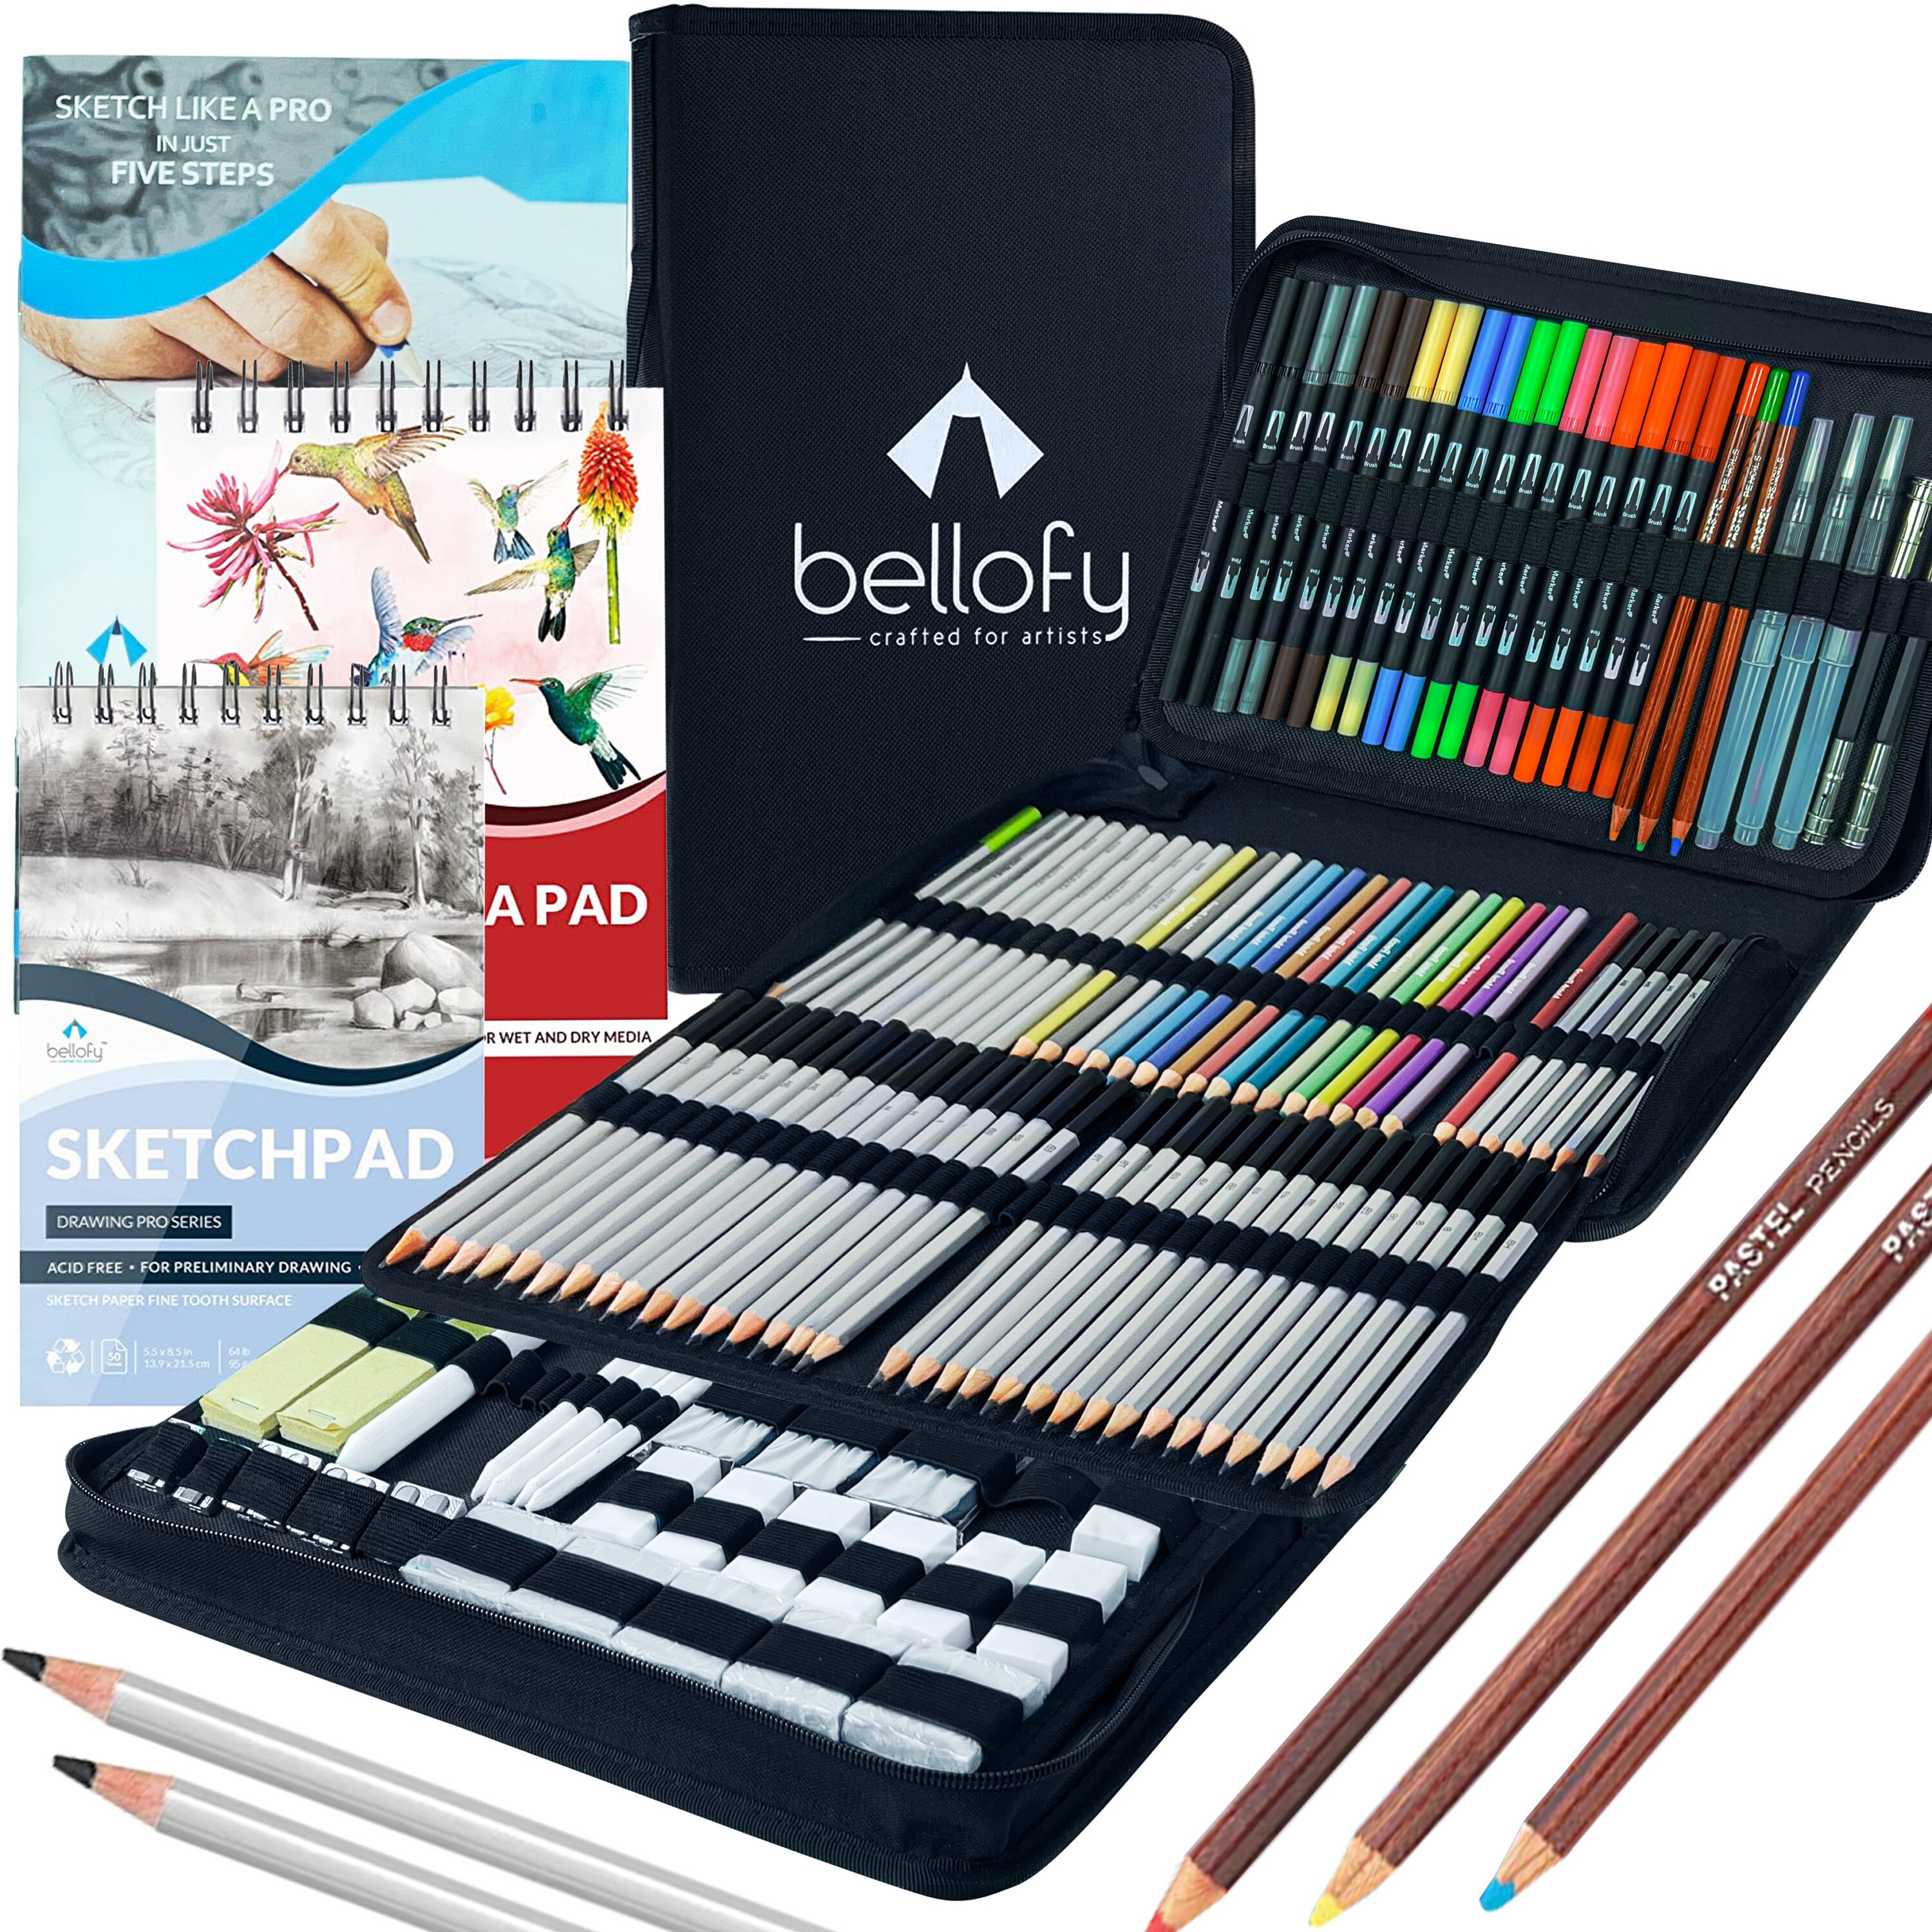 Bellofy - 33-piece Professional Drawing and Sketch Kit 